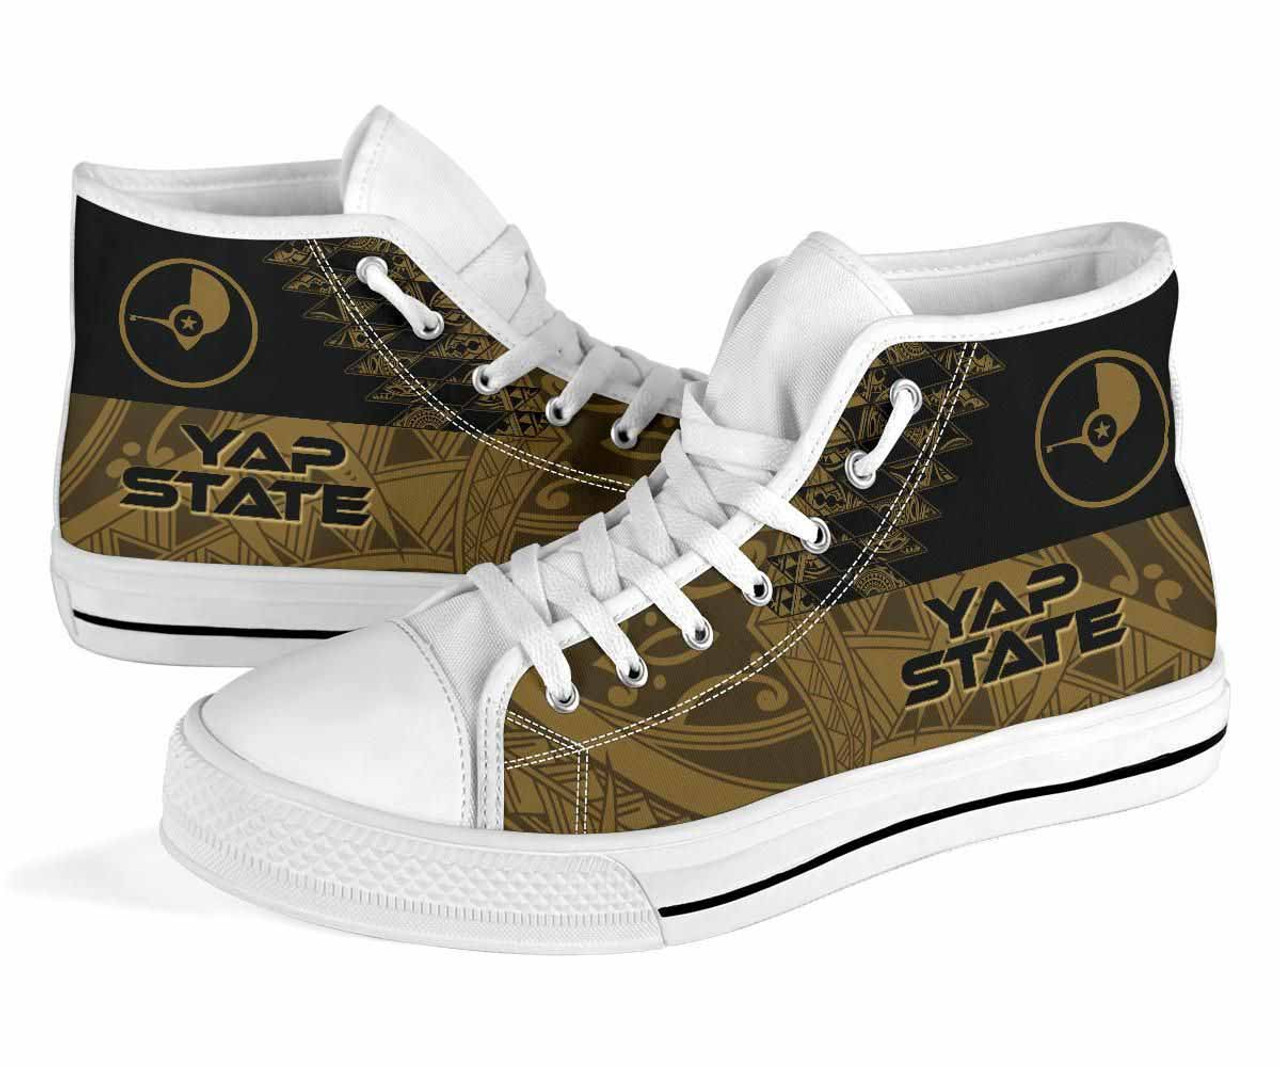 Yap State High Top Shoes - Gold Color Symmetry Style 3